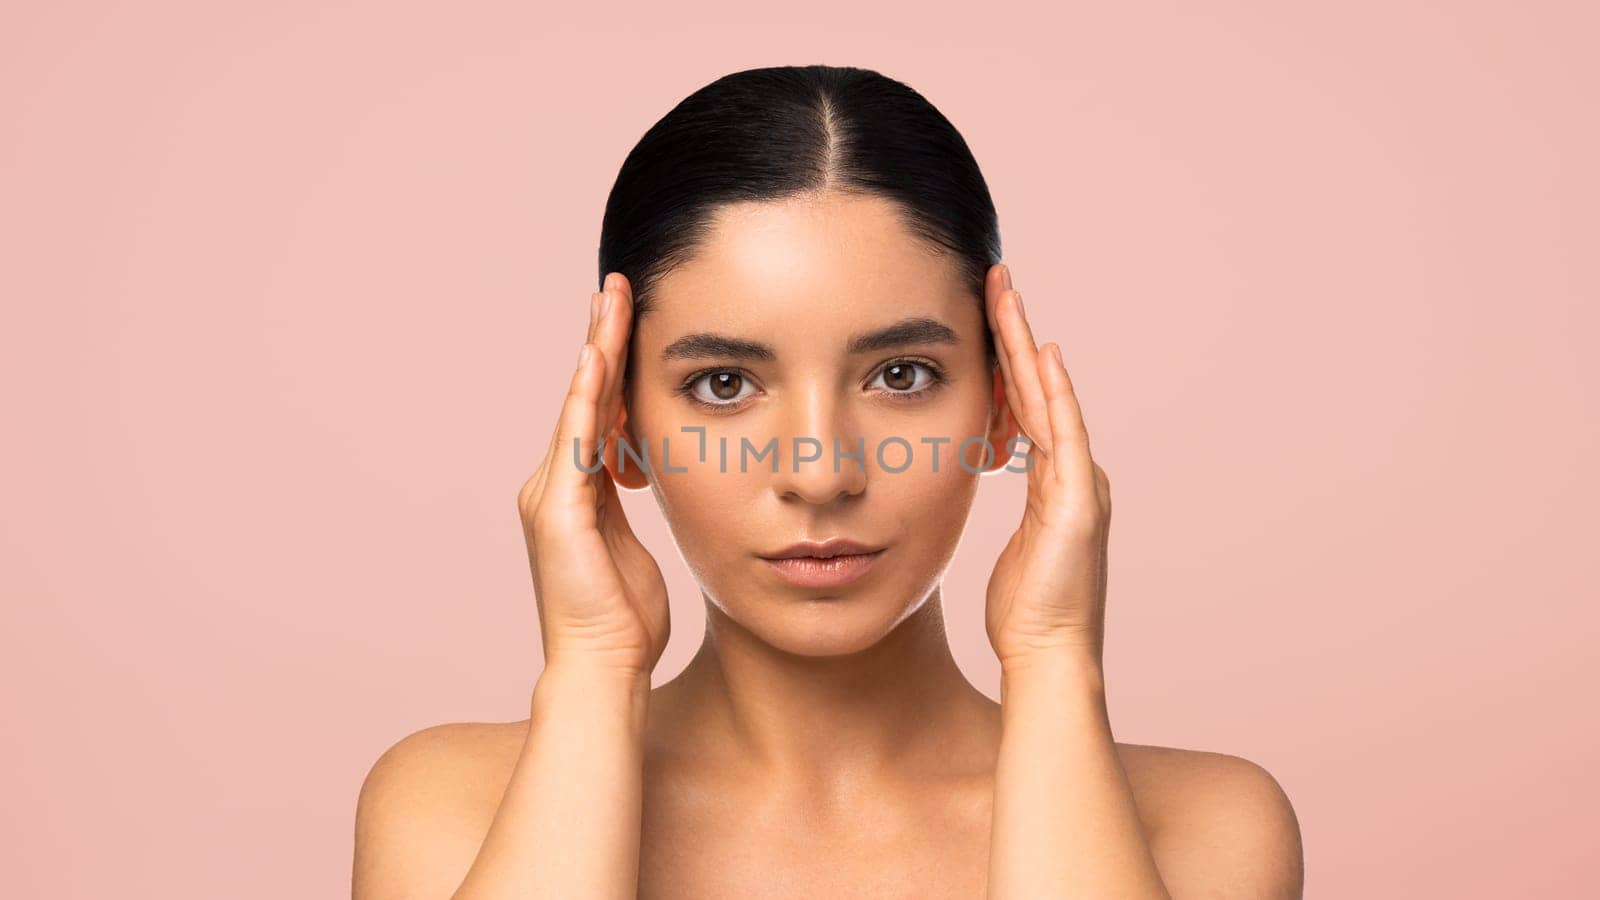 Beauty perfection. Attractive serious woman 25s with perfect skin and symmetrical face holding her hands next to head full face portrait by AndreiDavid